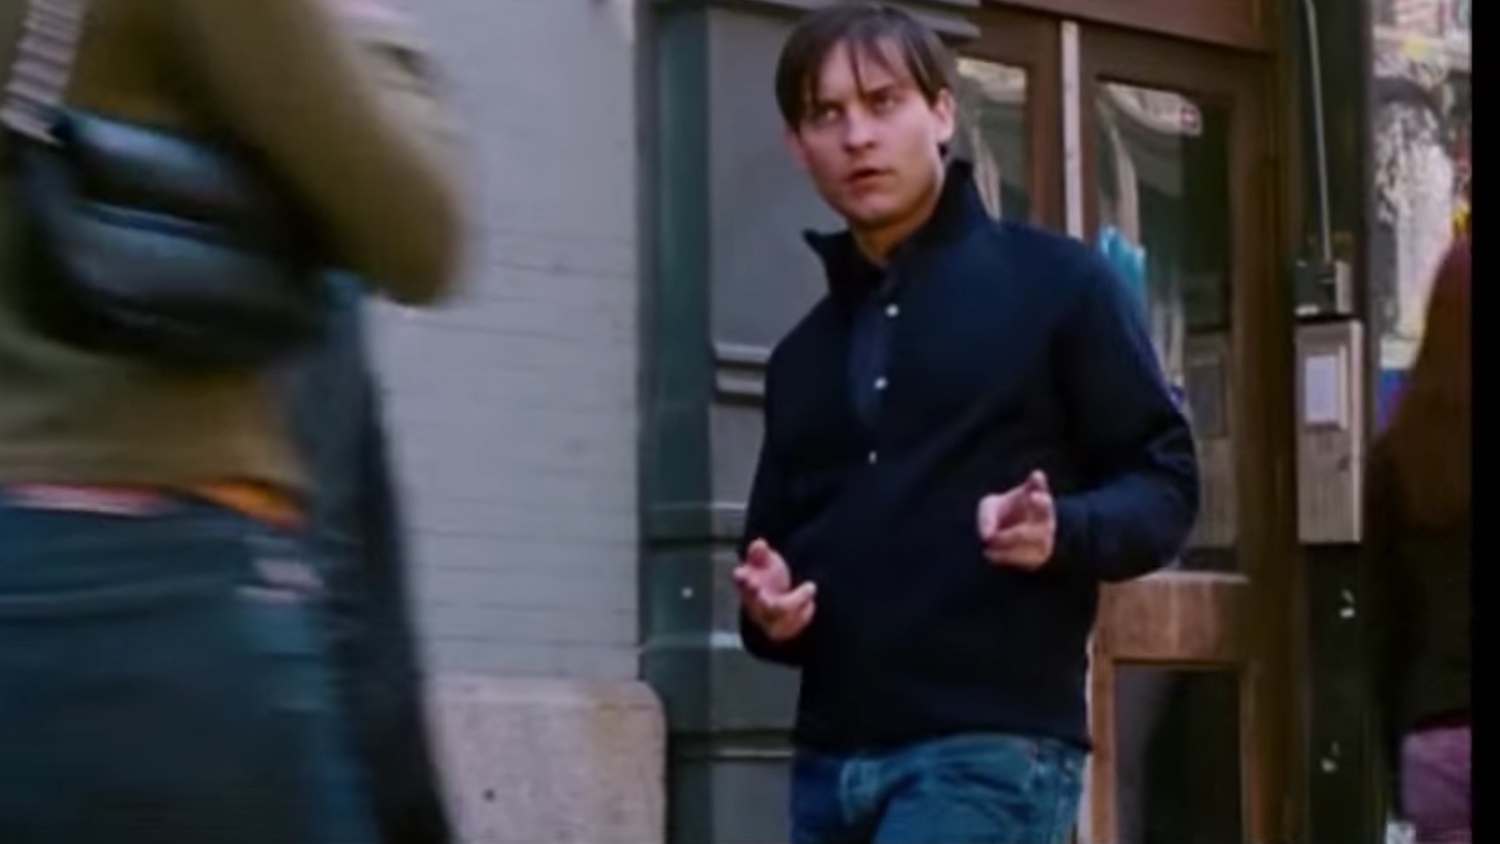 peter parkers spider man 3 dance scene is even more awkward with no music social